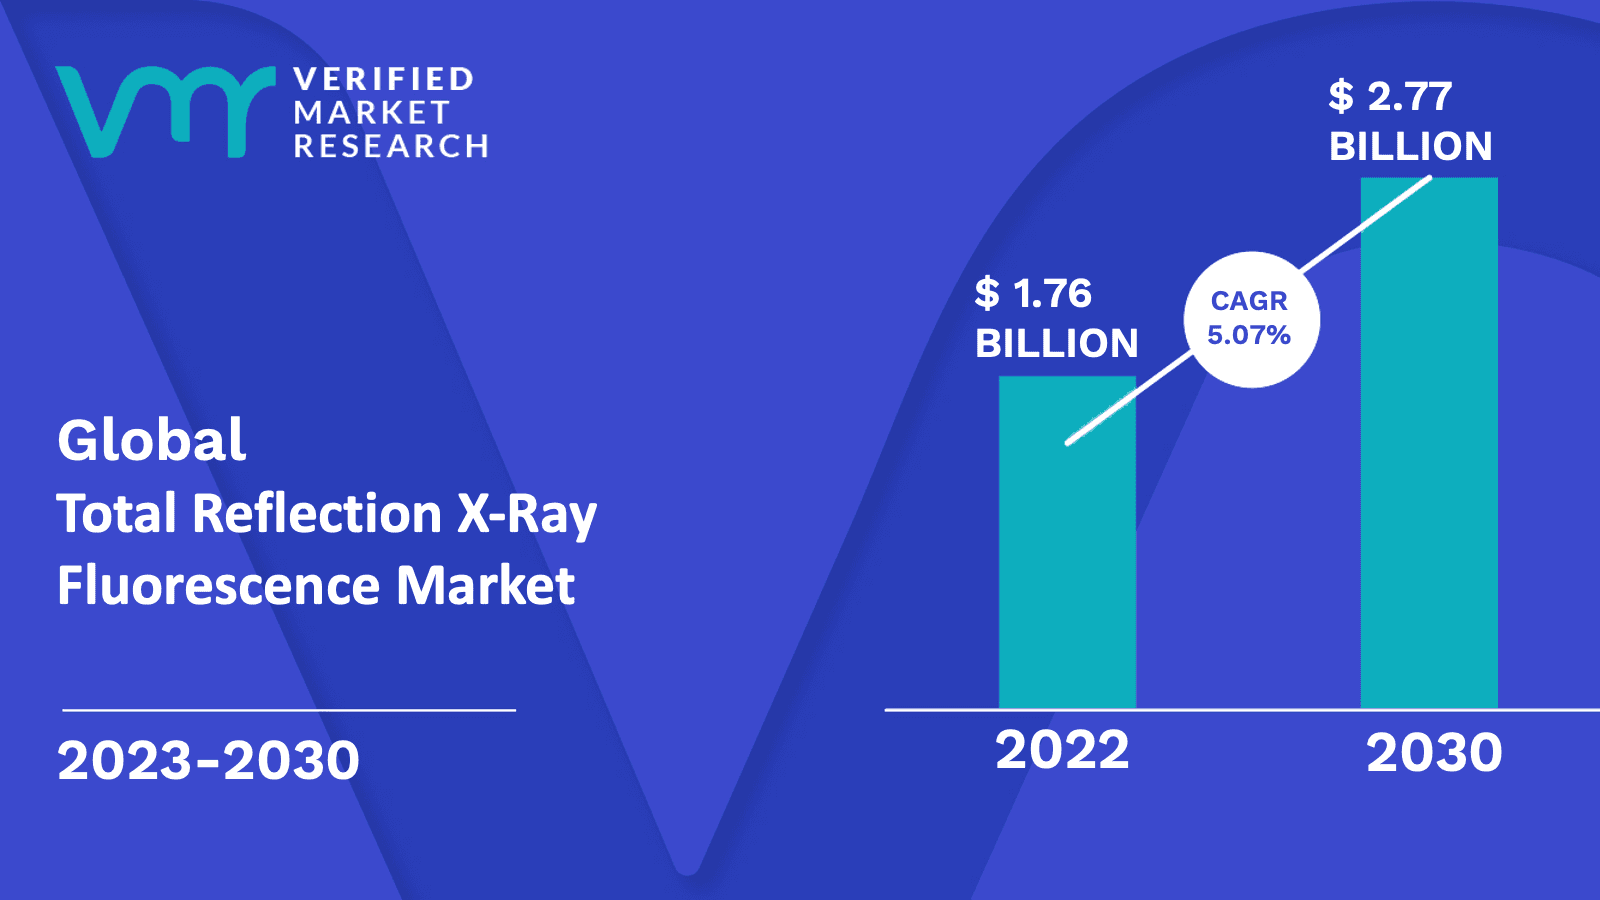 Product Total Reflection X-Ray Fluorescence Market Size And Forecast image